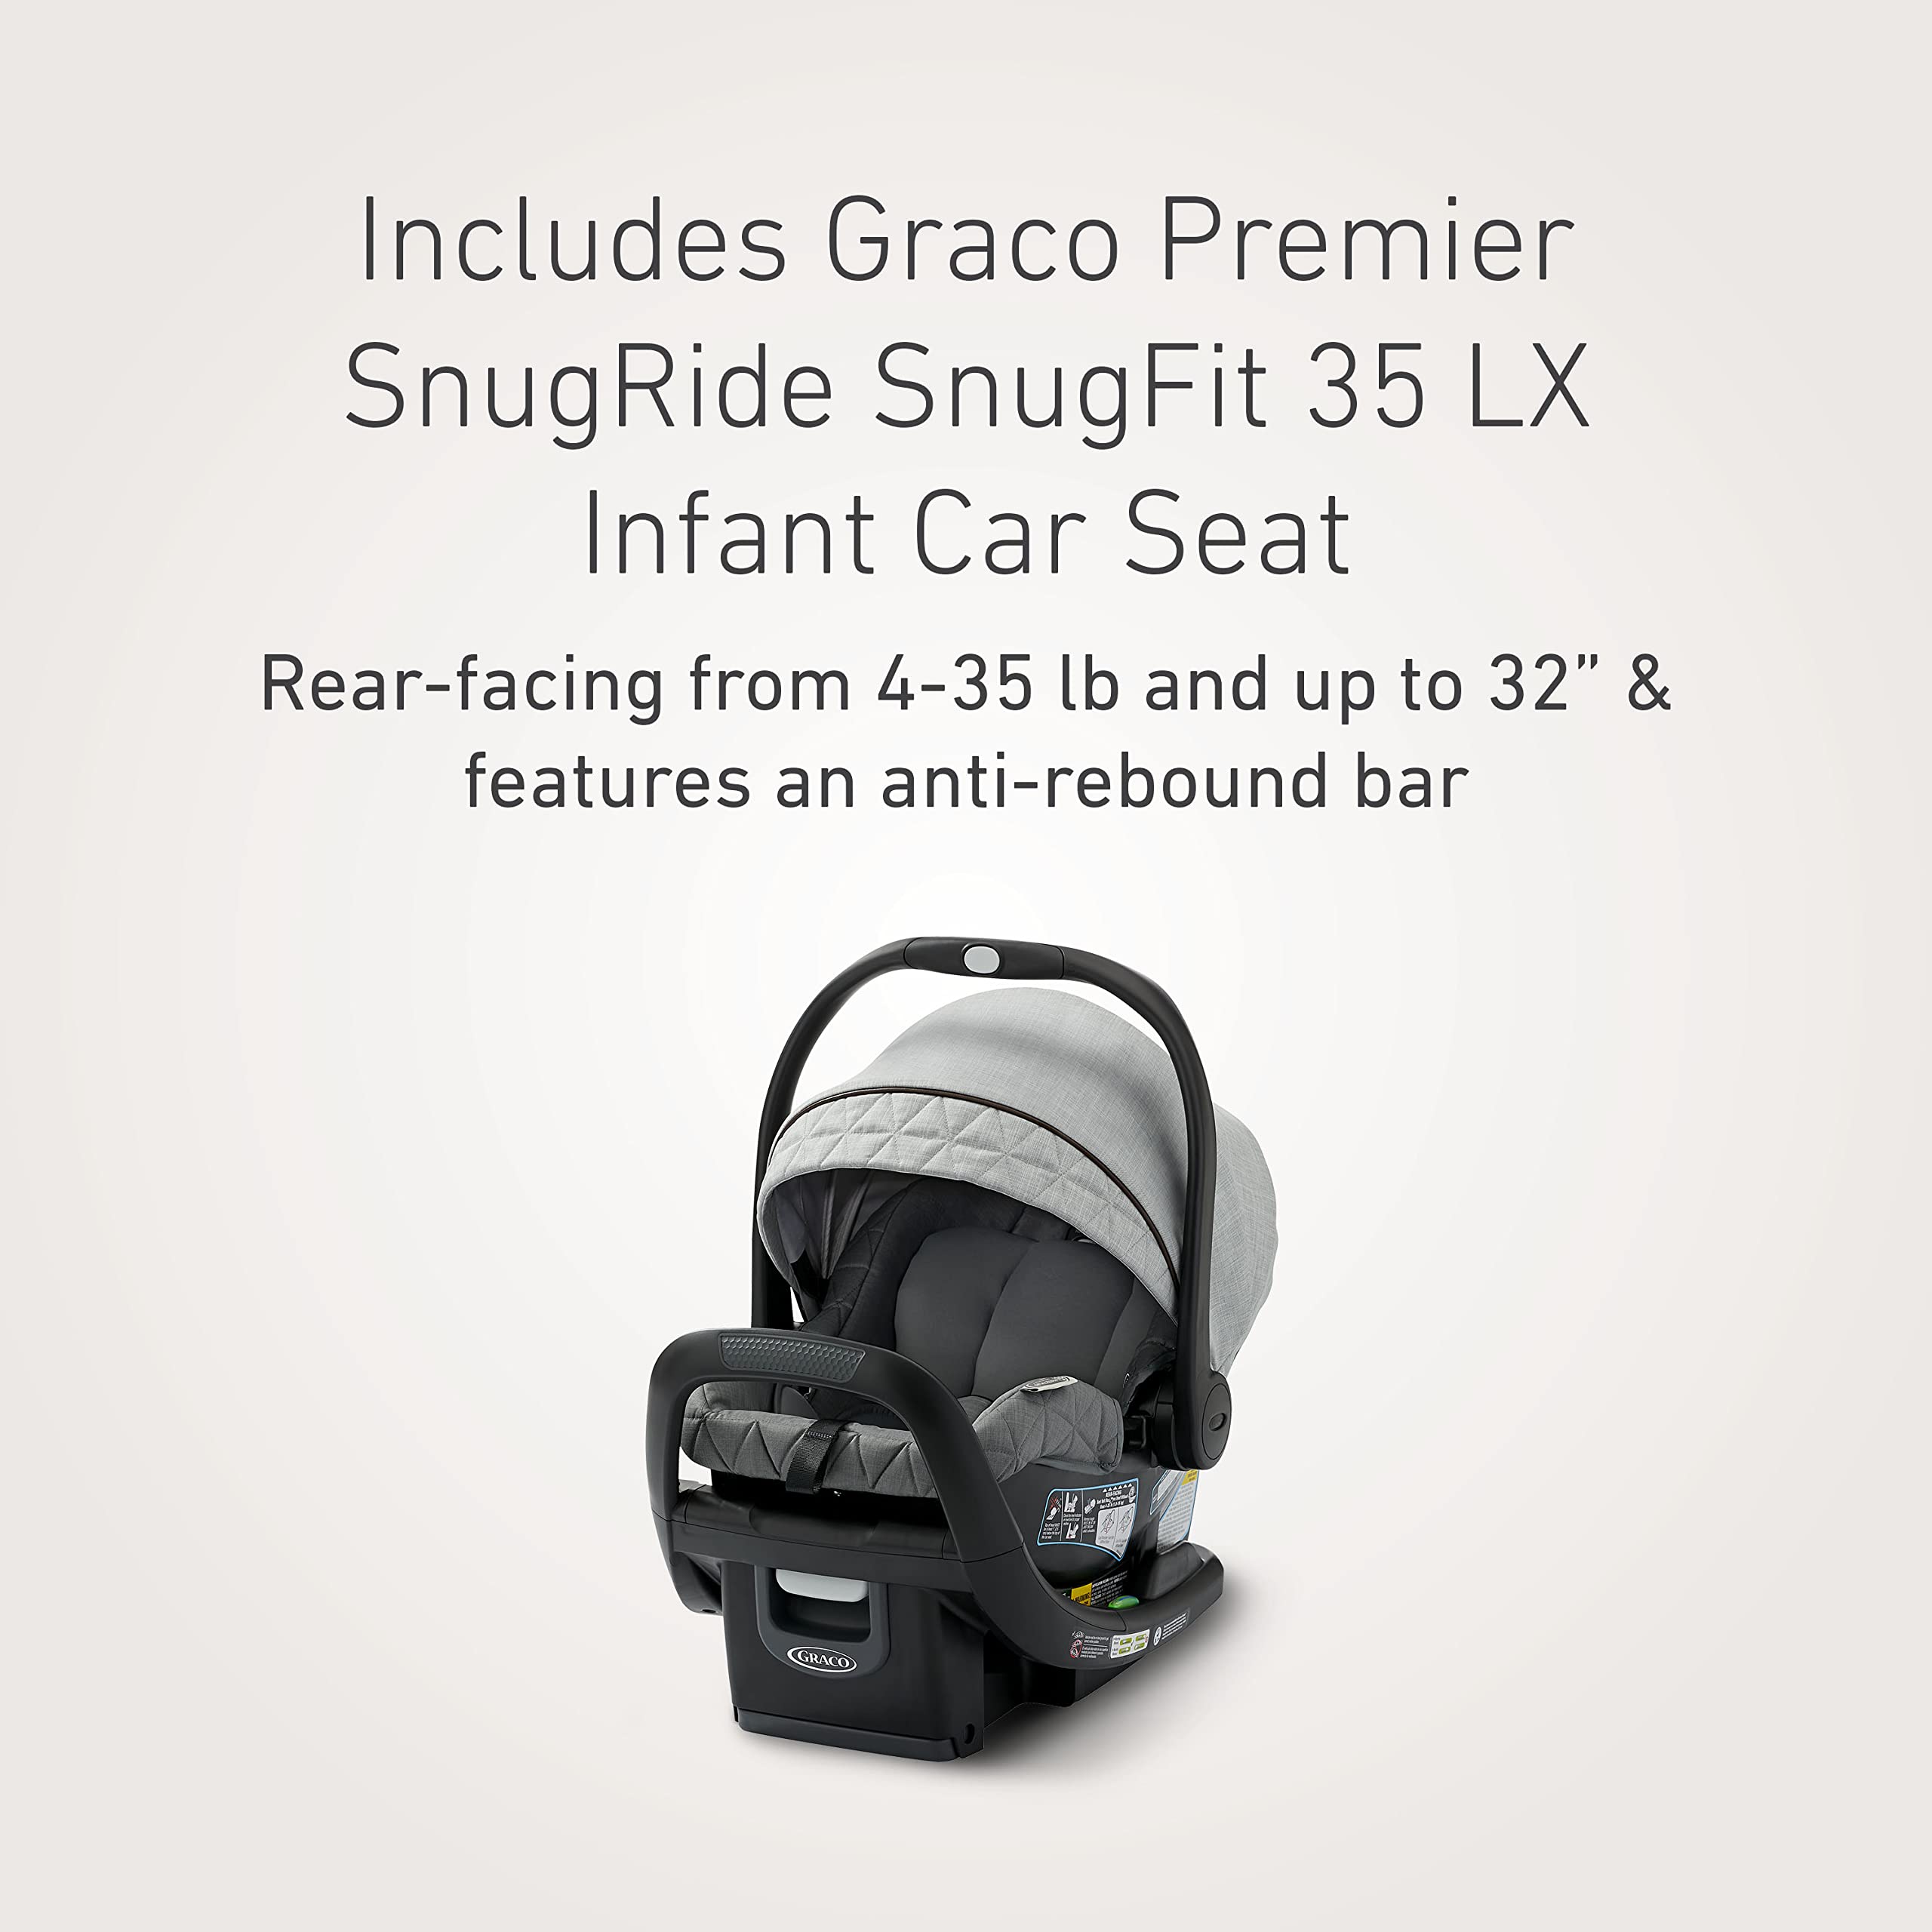 Graco® Premier Modes™ Nest 3-in-1 Travel System, Midtown